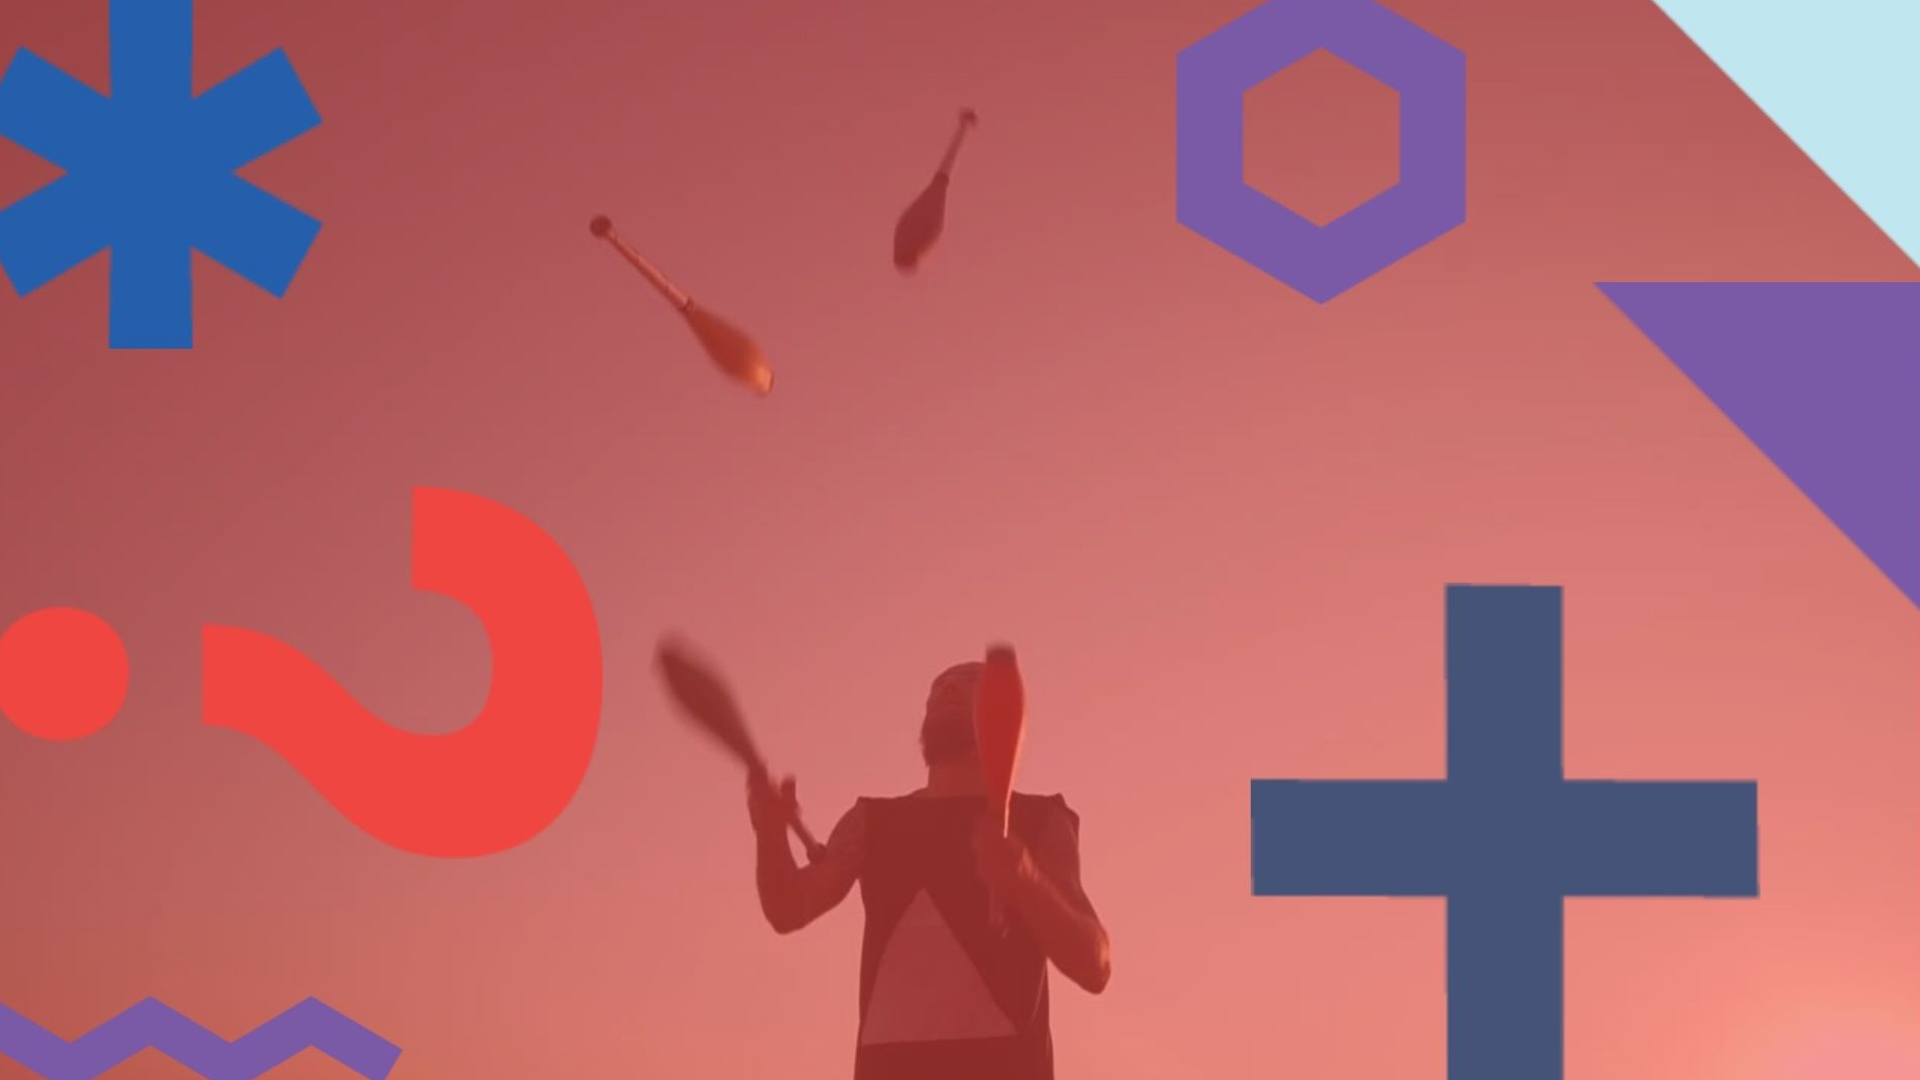 Silhouette of man juggling with clubs